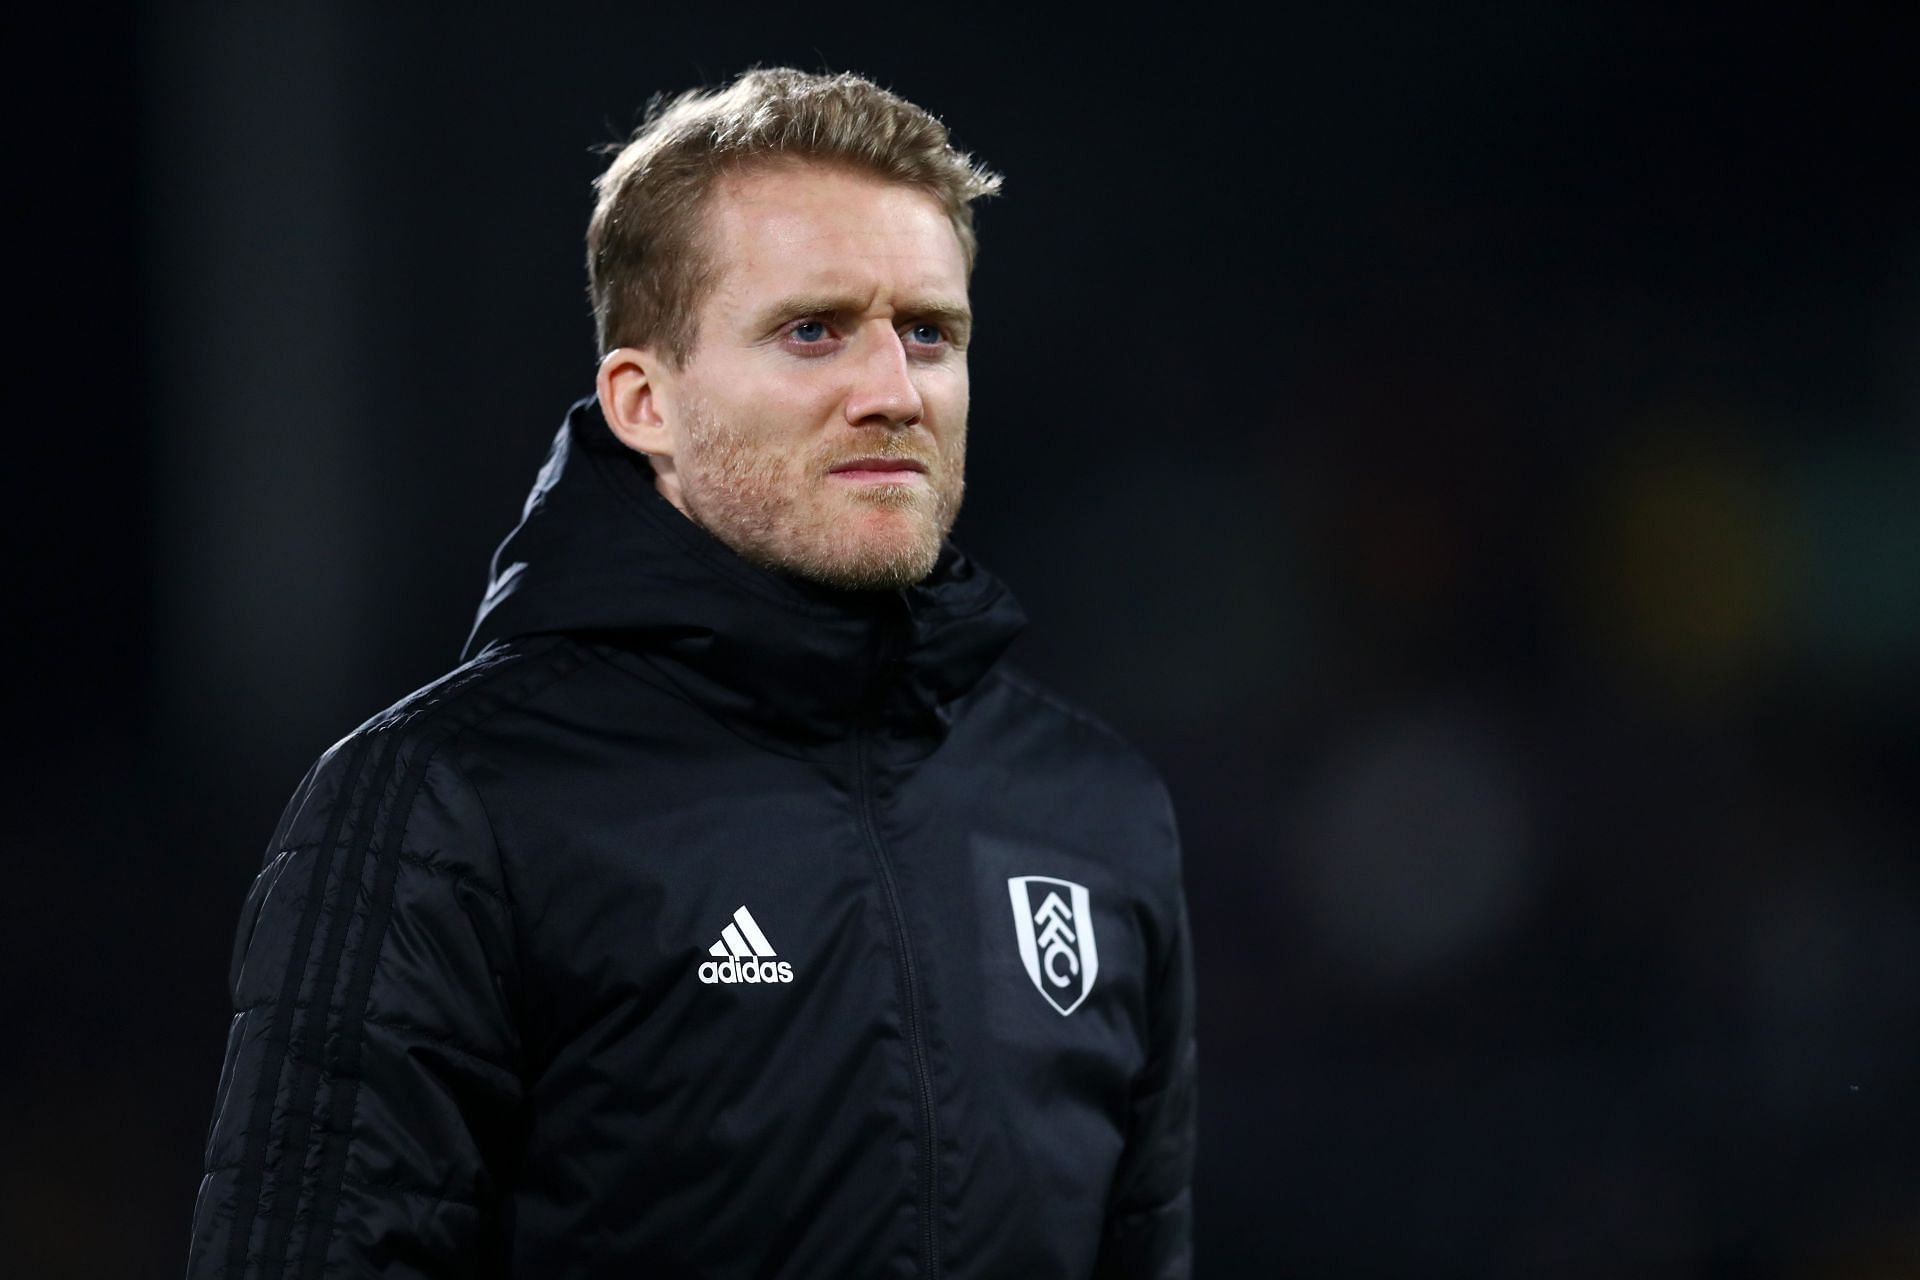 Schurrle prought a premature end to his career